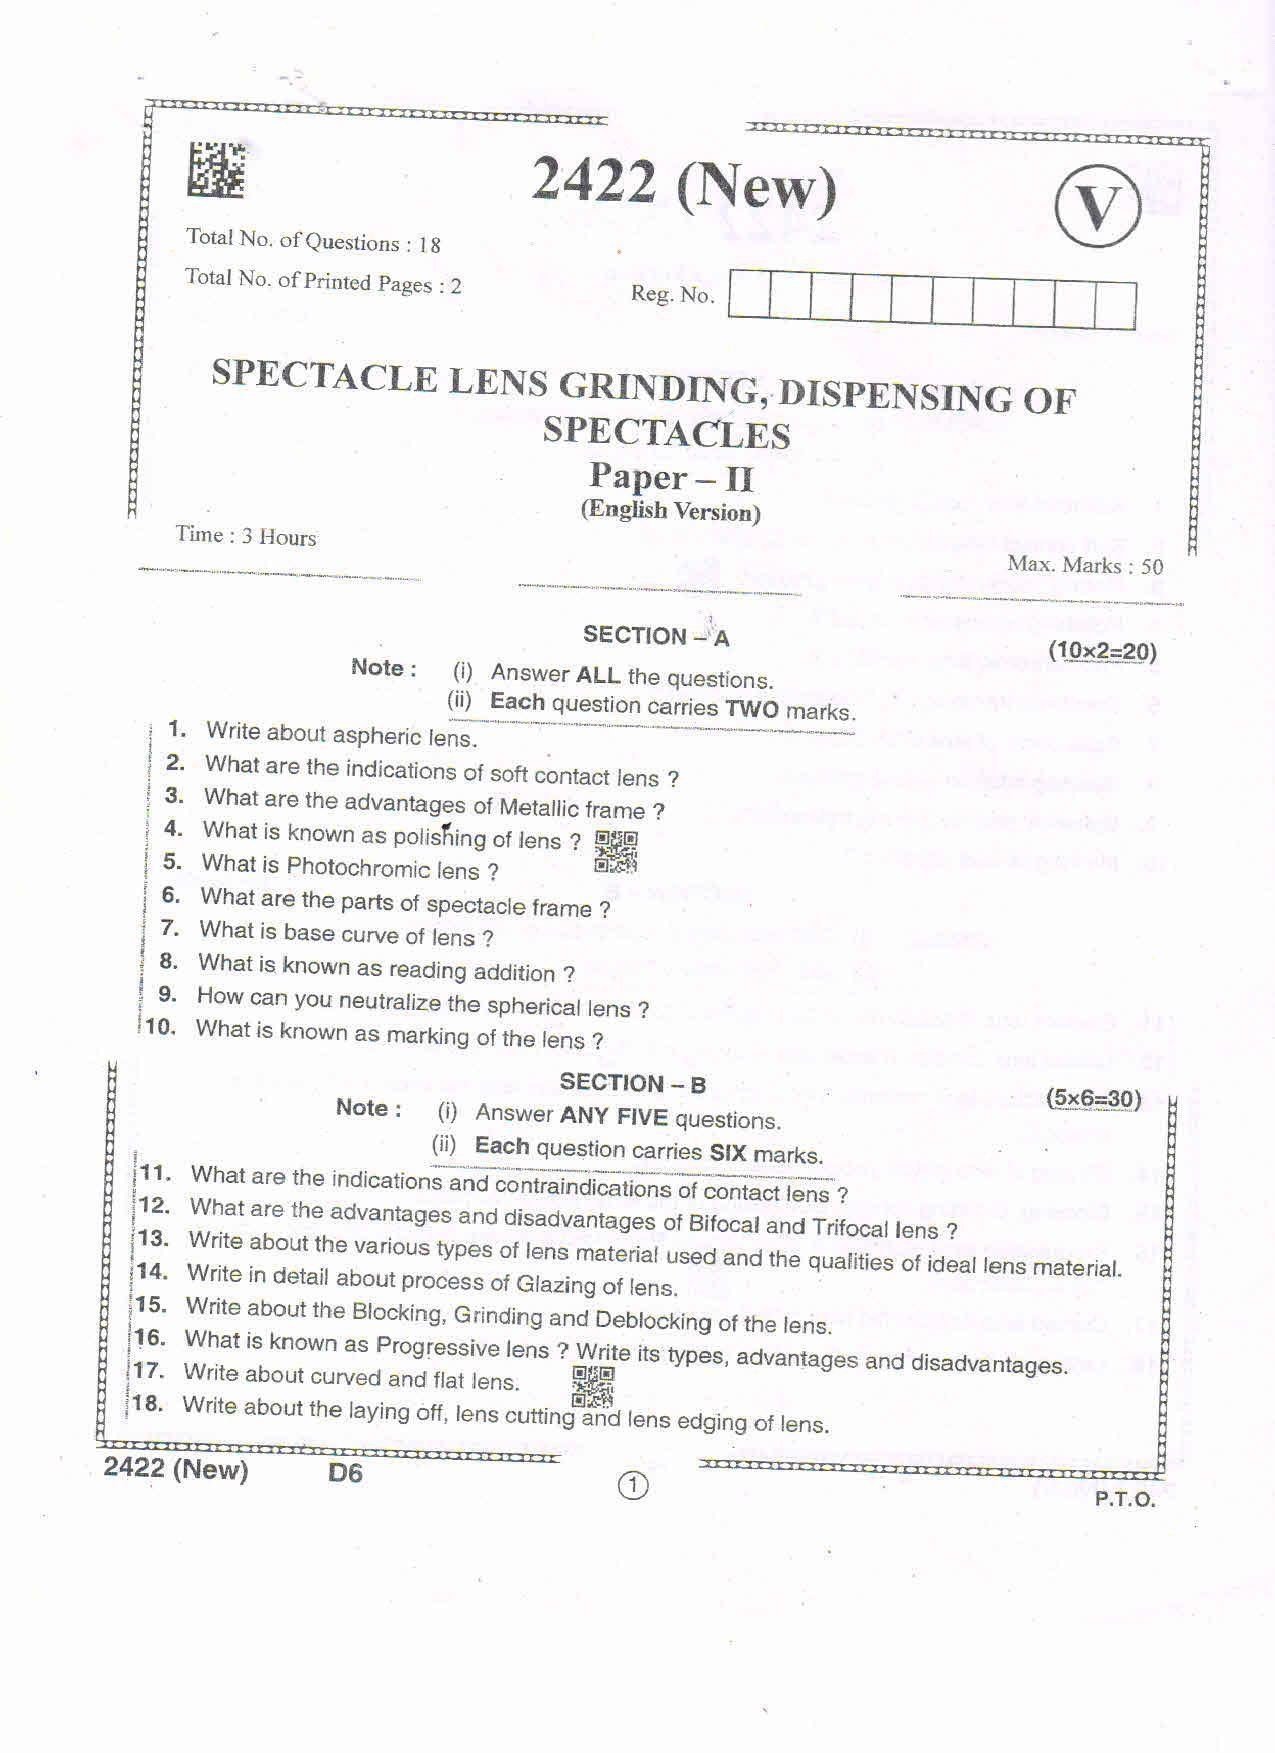 AP Intermediate 2nd Year Vocational Question Paper September-2021 - SpectacleLens_Grinding,Dispensing_of_Spectables-II - Page 1